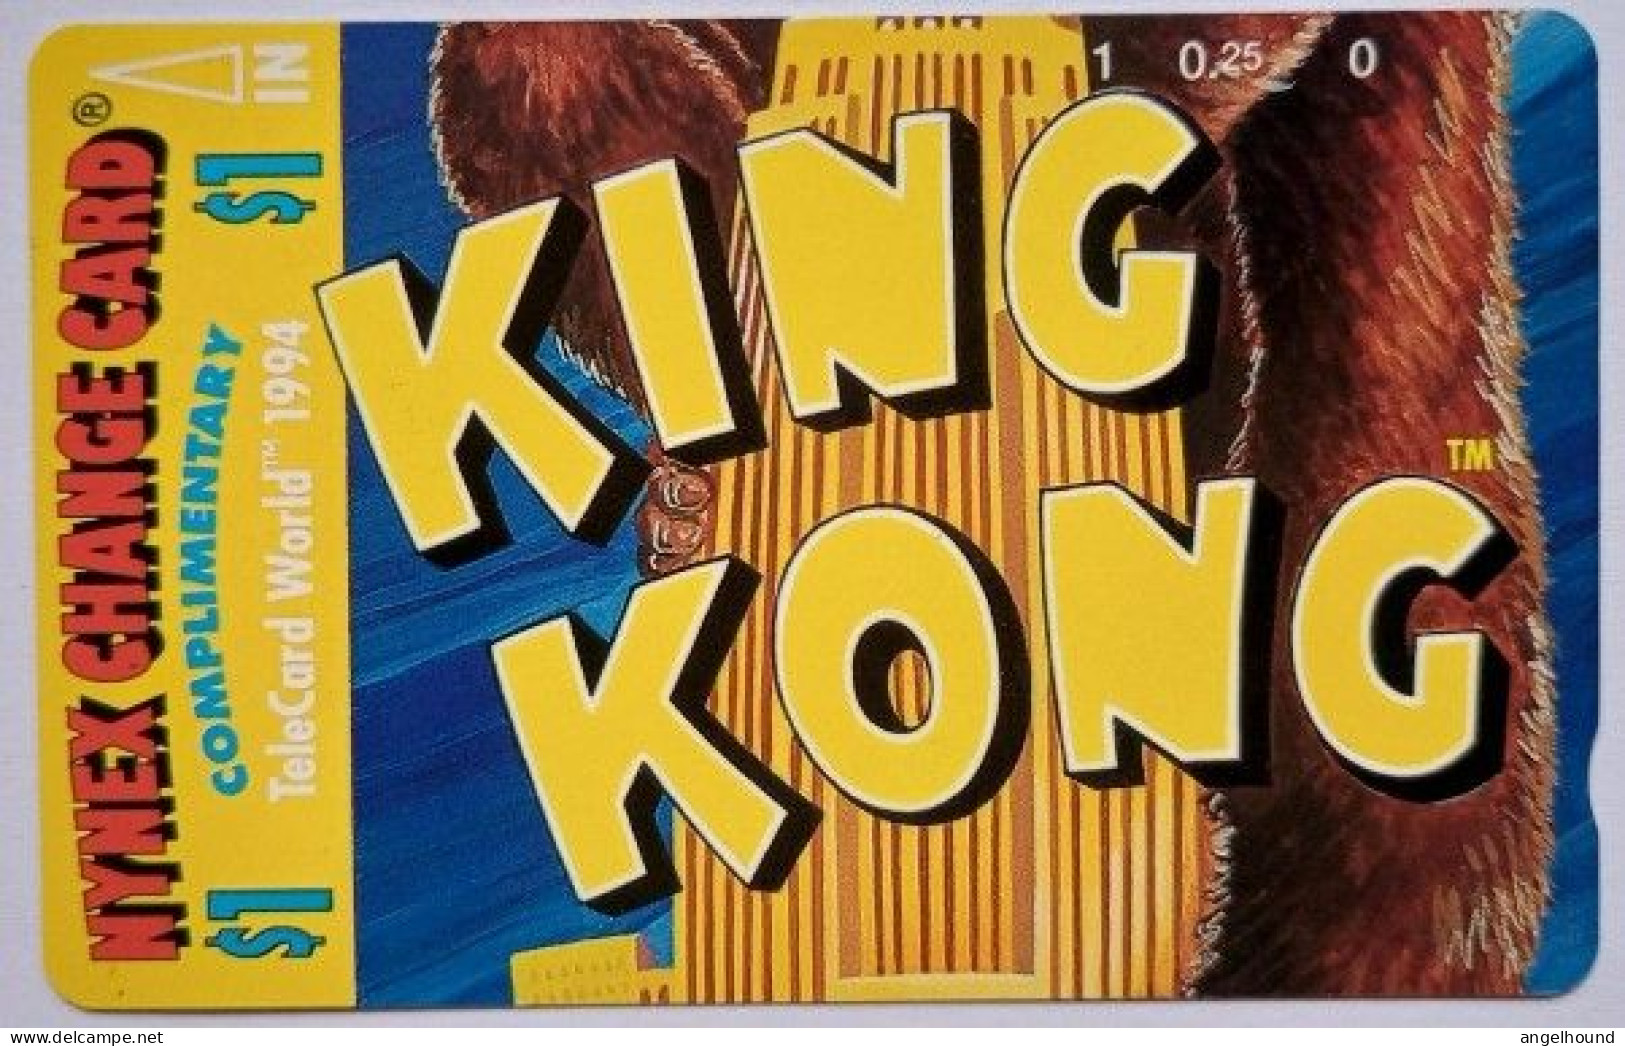 USA Nynex $1 MINT Tamura " King Kpng Puzzle  2/3 " - Schede Magnetiche